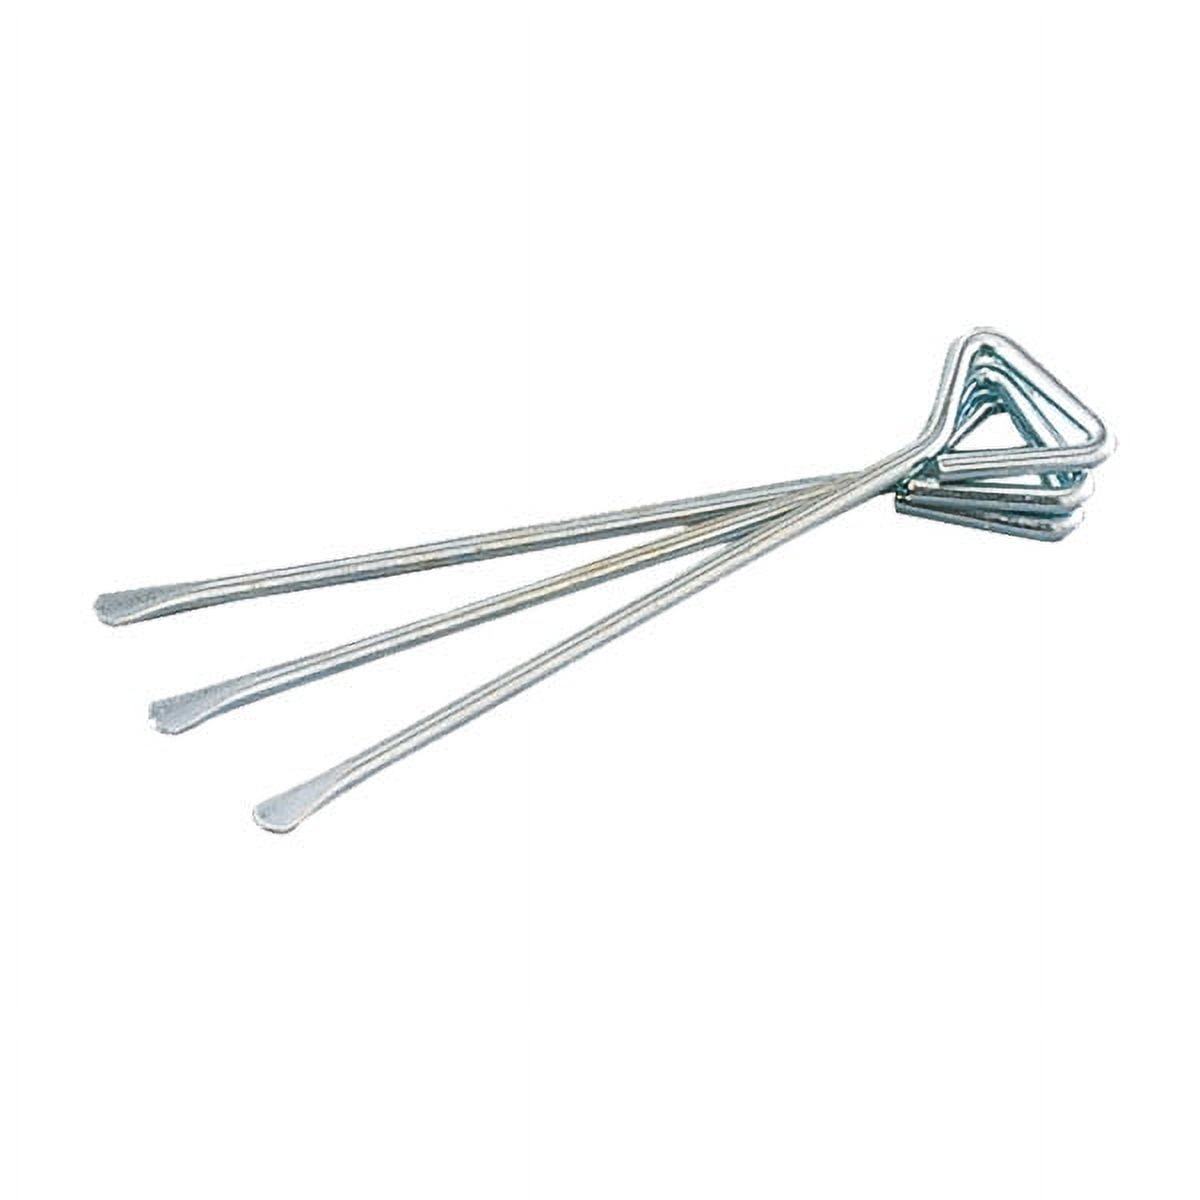 Picture of Champion Sports M110 Base Spike; Silver